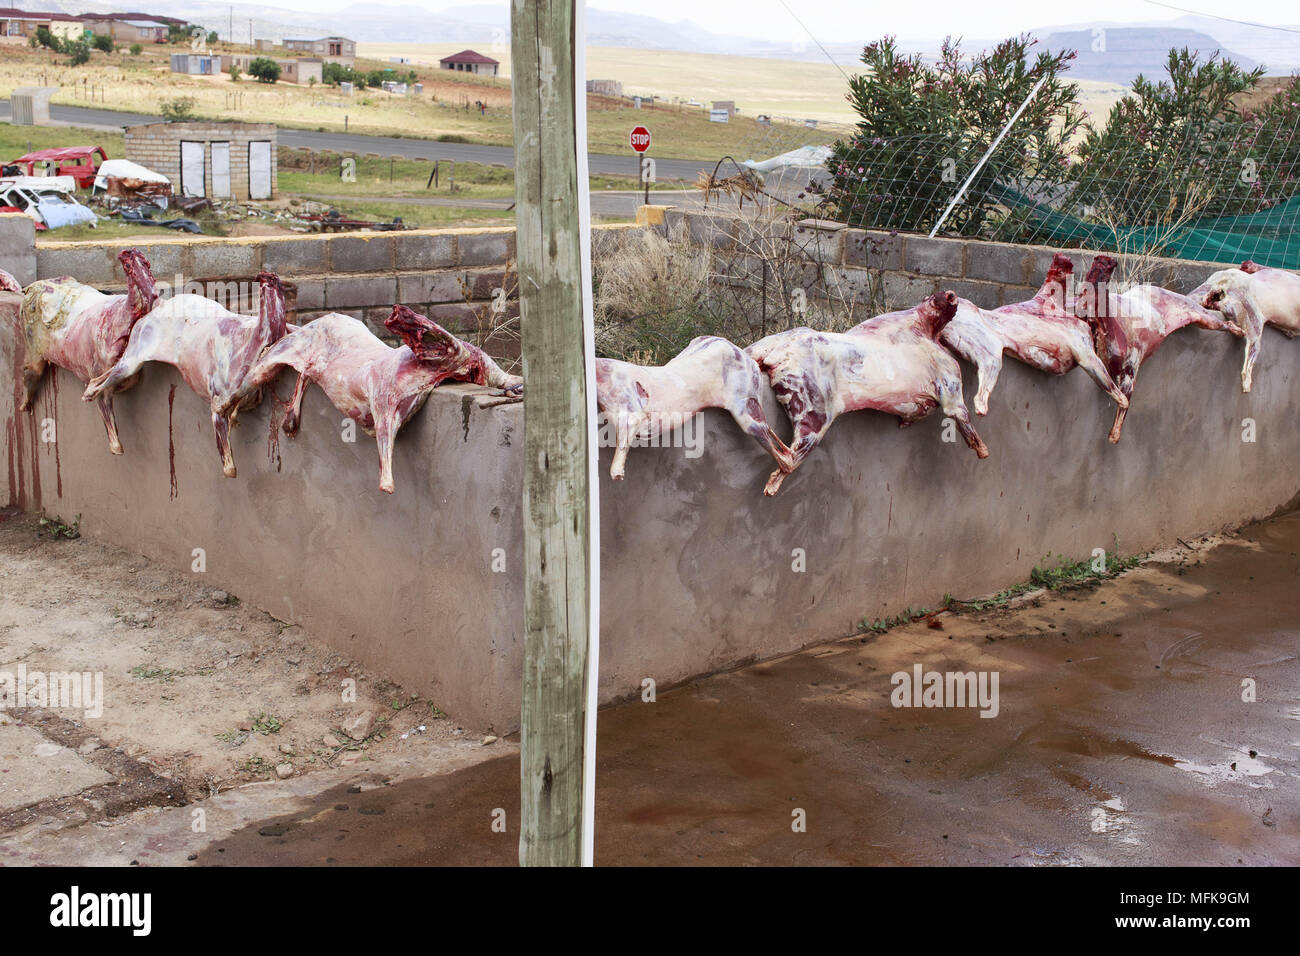 December 28, 2017 - Matatiele, Eastern Cape, South Africa - During December and January, the Xhosa and Sotho people celebrate the initiation of their boys. On this occasion ten slaugthered sheep are laid out for an initiation ceremony. The meat will cater for over 50 hungry initiates, their families and friends. (Credit Image: © Stefan Kleinowitz via ZUMA Wire) Stock Photo